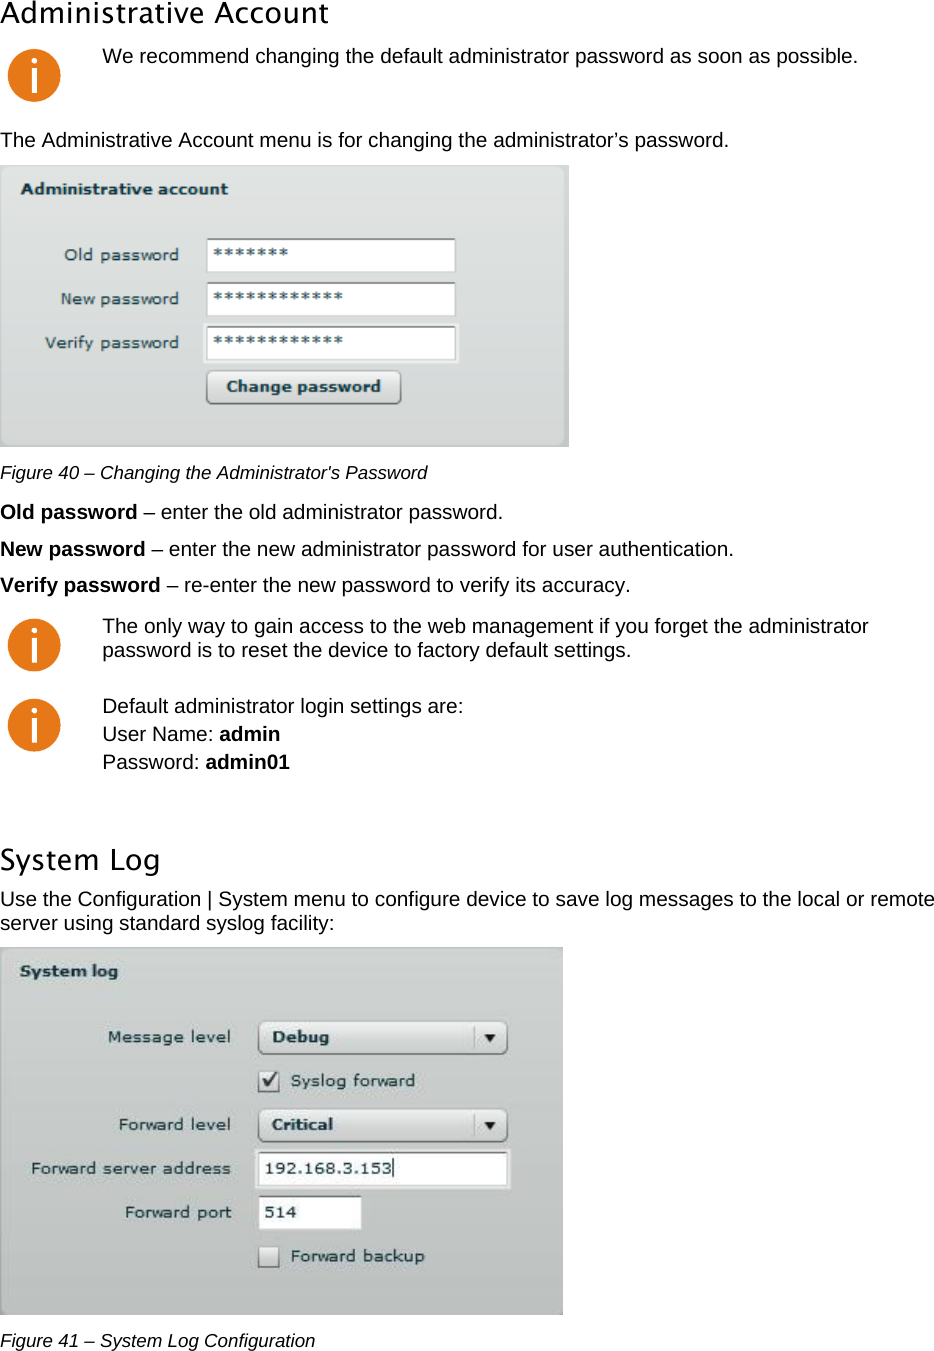  LigoWave Page 35 Administrative Account  We recommend changing the default administrator password as soon as possible. The Administrative Account menu is for changing the administrator’s password.   Figure 40 – Changing the Administrator&apos;s Password Old password – enter the old administrator password.  New password – enter the new administrator password for user authentication.  Verify password – re-enter the new password to verify its accuracy.   The only way to gain access to the web management if you forget the administrator password is to reset the device to factory default settings.  Default administrator login settings are:  User Name: admin  Password: admin01  System Log  Use the Configuration | System menu to configure device to save log messages to the local or remote server using standard syslog facility:   Figure 41 – System Log Configuration 